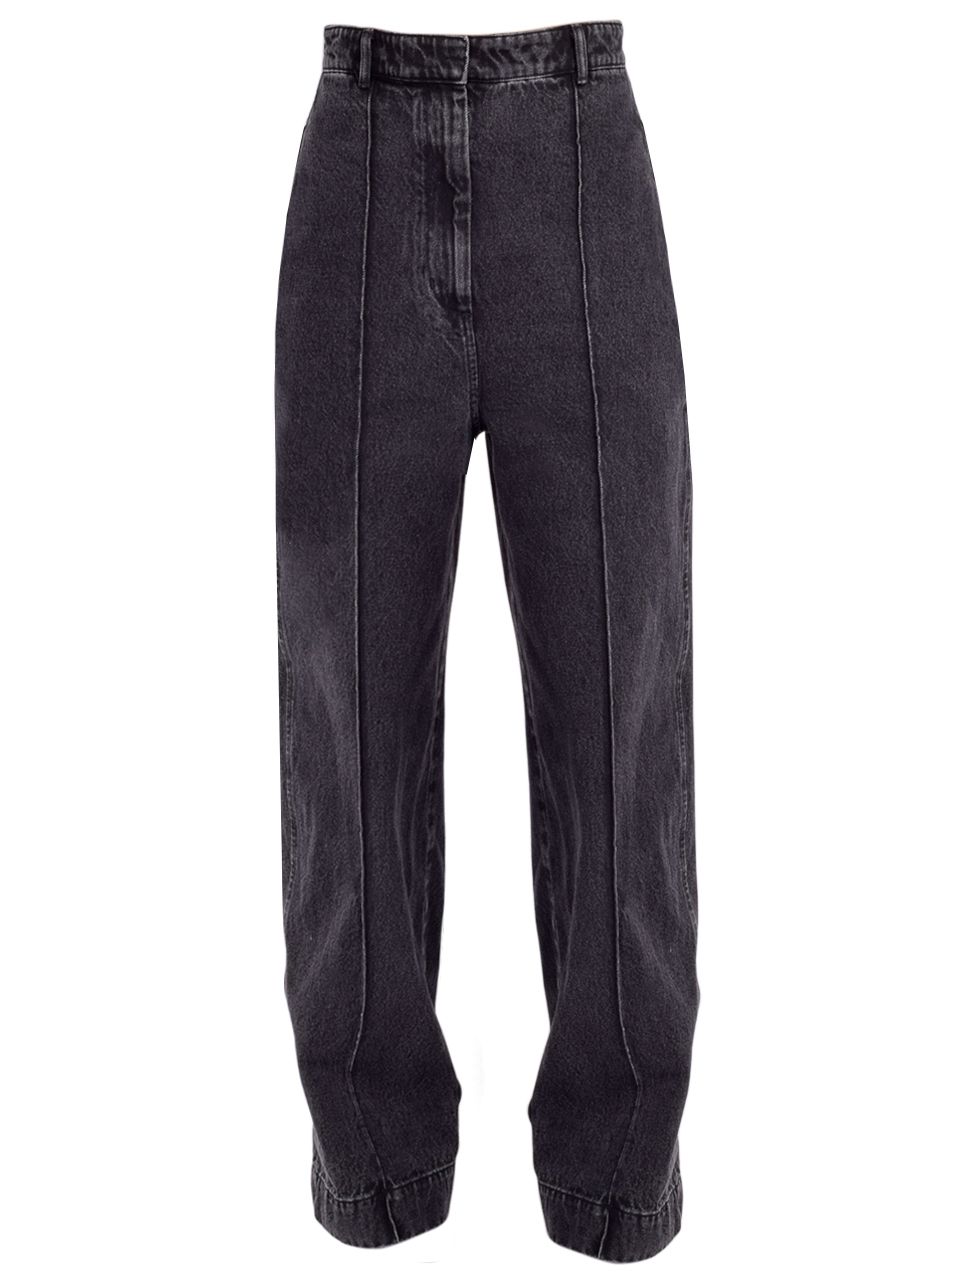 3.1 Phillip Lim Denim Extreme High Waist Straight Trouser in Washed Black Product Shot 